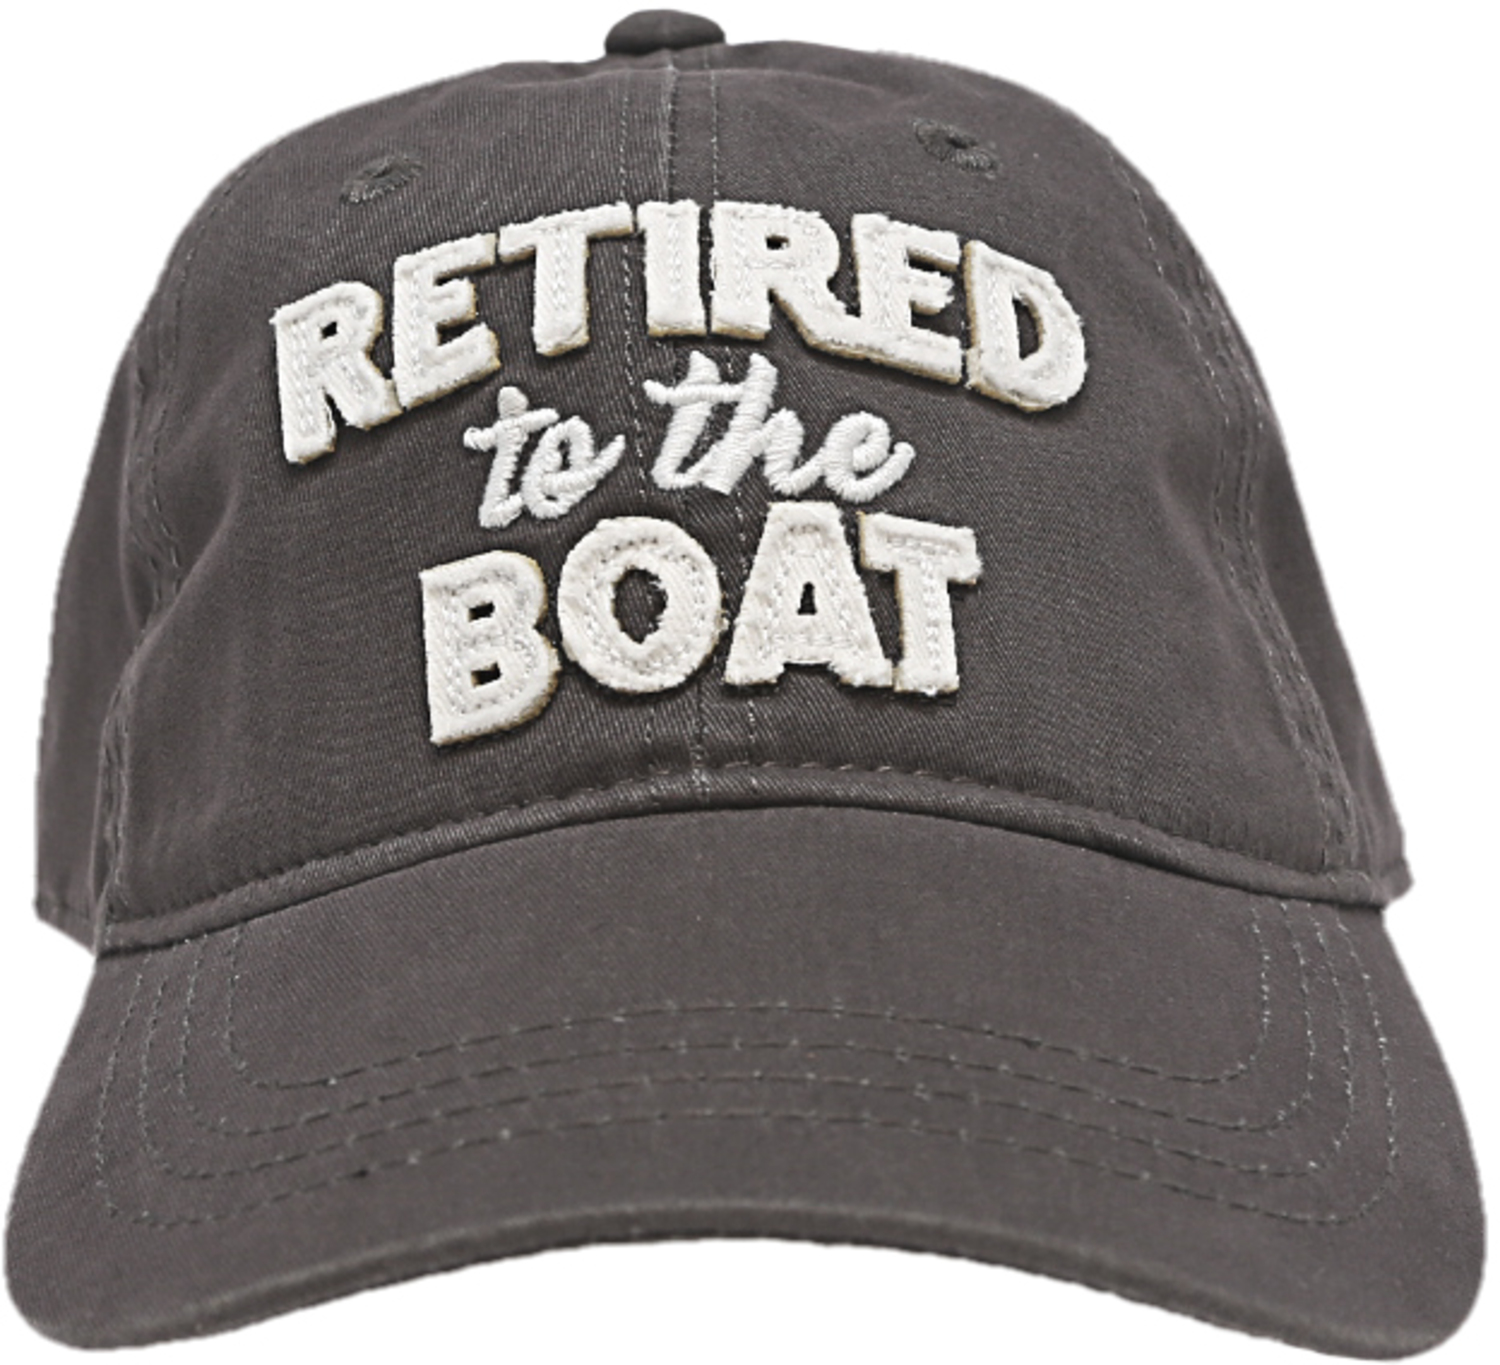 Boat by Retired Life - Boat - Gray Adjustable Hat